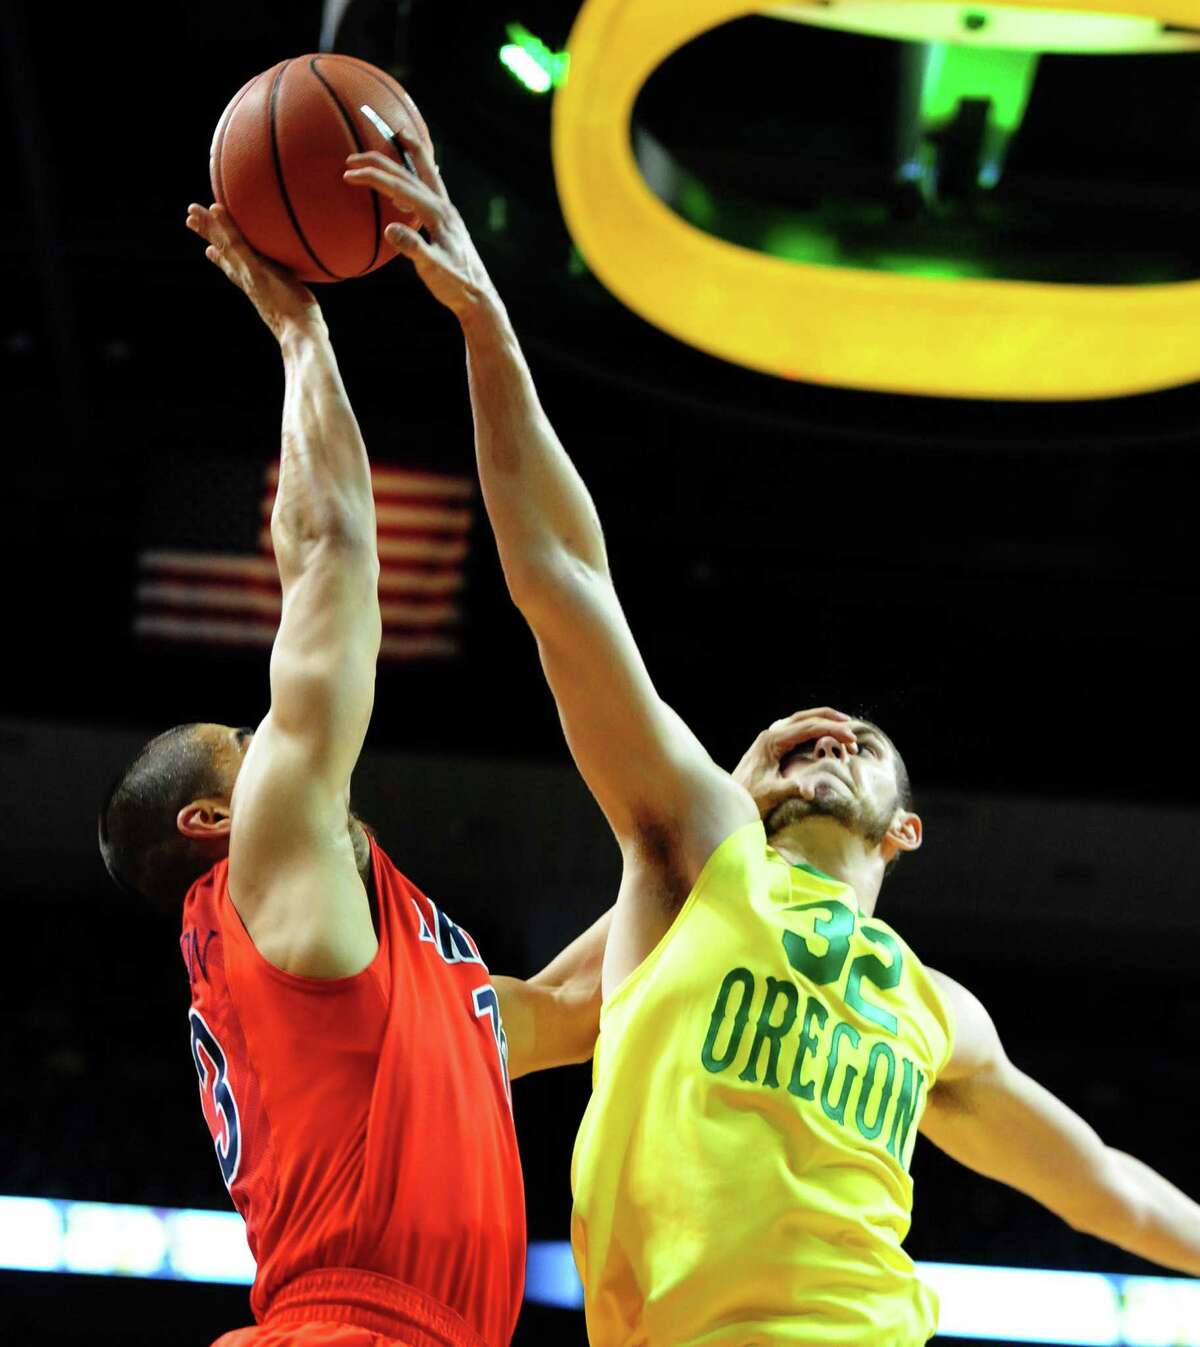 Oregon's Ben Carter blocks a shot attempt by Arizona's Nick Johnson in the Ducks' upset over the No. 3 Wildcats in Eugene, Ore.